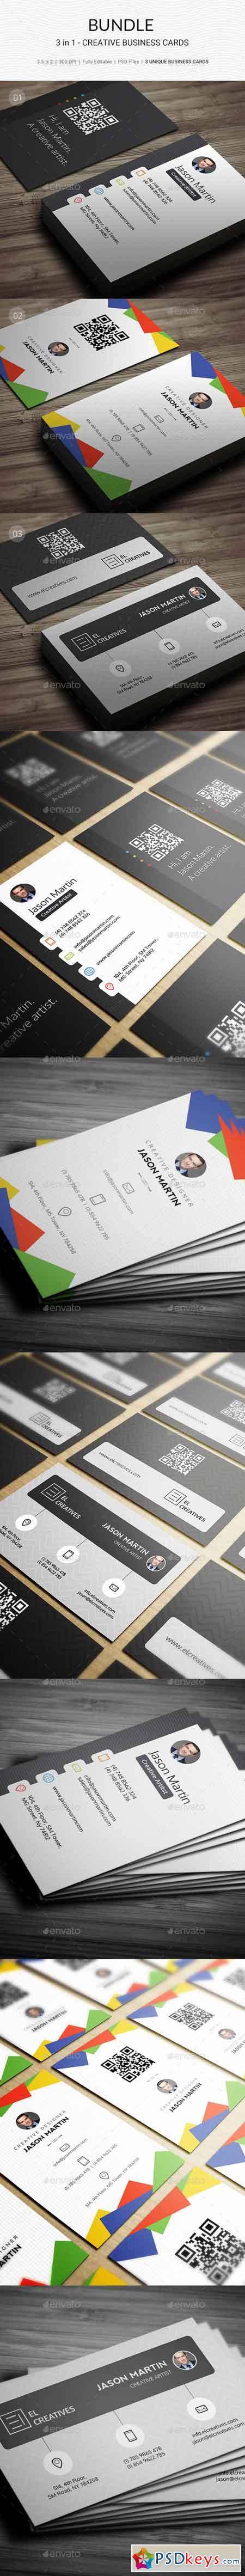 Bundle - 3 in 1 - Prime Business Cards - 179 21908391